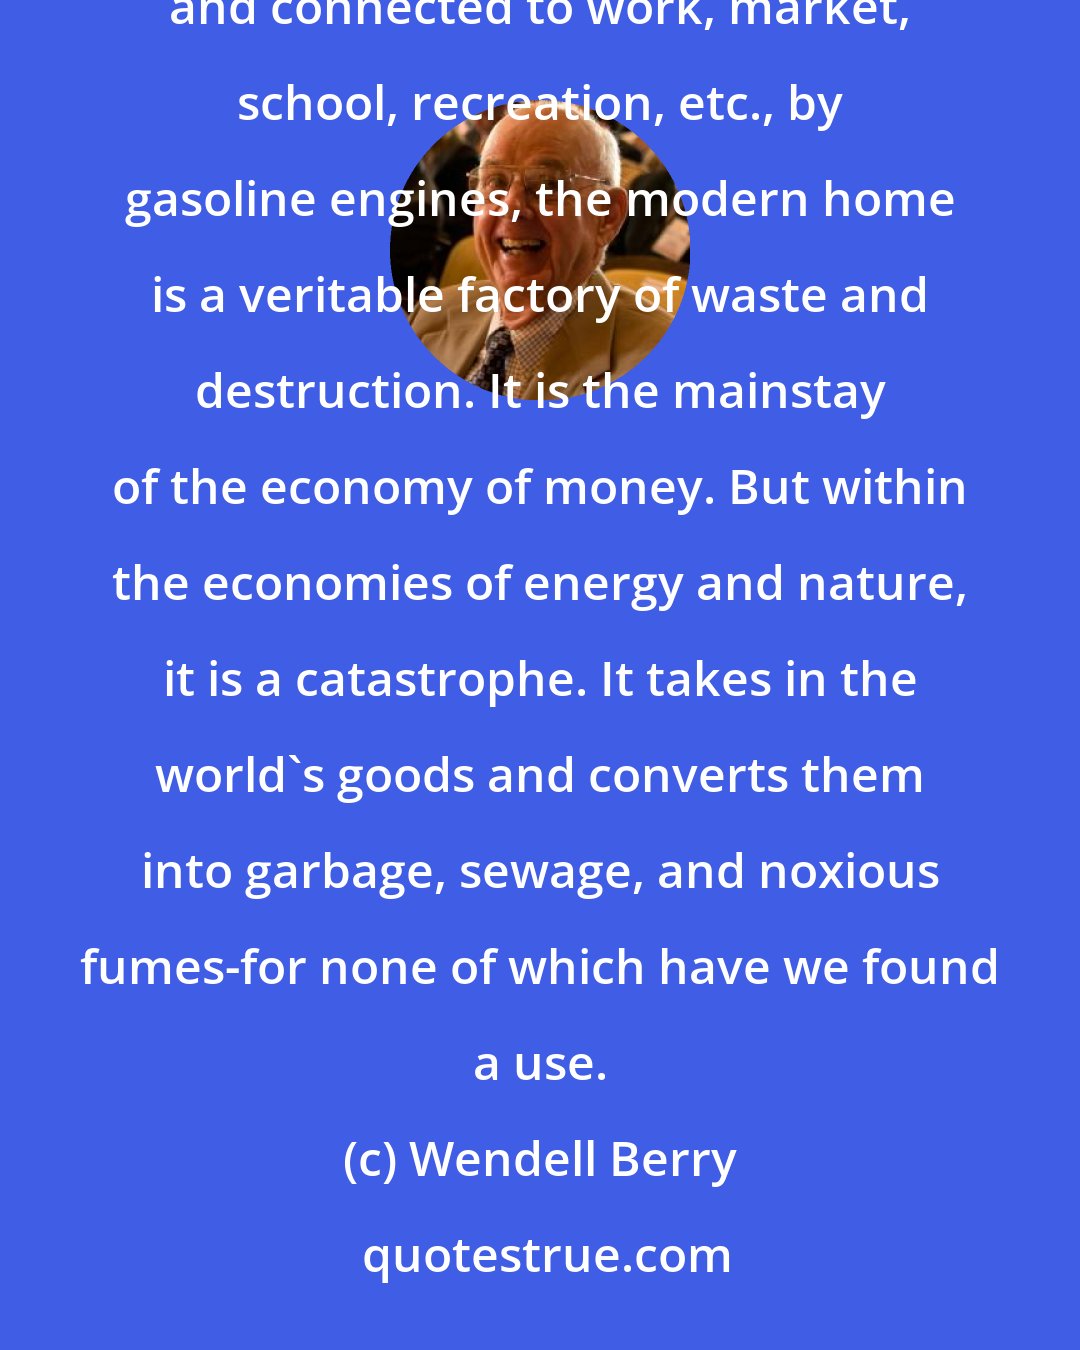 Wendell Berry: With its array of gadgets and machines, all powered by energies that are destructive of land or air or water, and connected to work, market, school, recreation, etc., by gasoline engines, the modern home is a veritable factory of waste and destruction. It is the mainstay of the economy of money. But within the economies of energy and nature, it is a catastrophe. It takes in the world's goods and converts them into garbage, sewage, and noxious fumes-for none of which have we found a use.